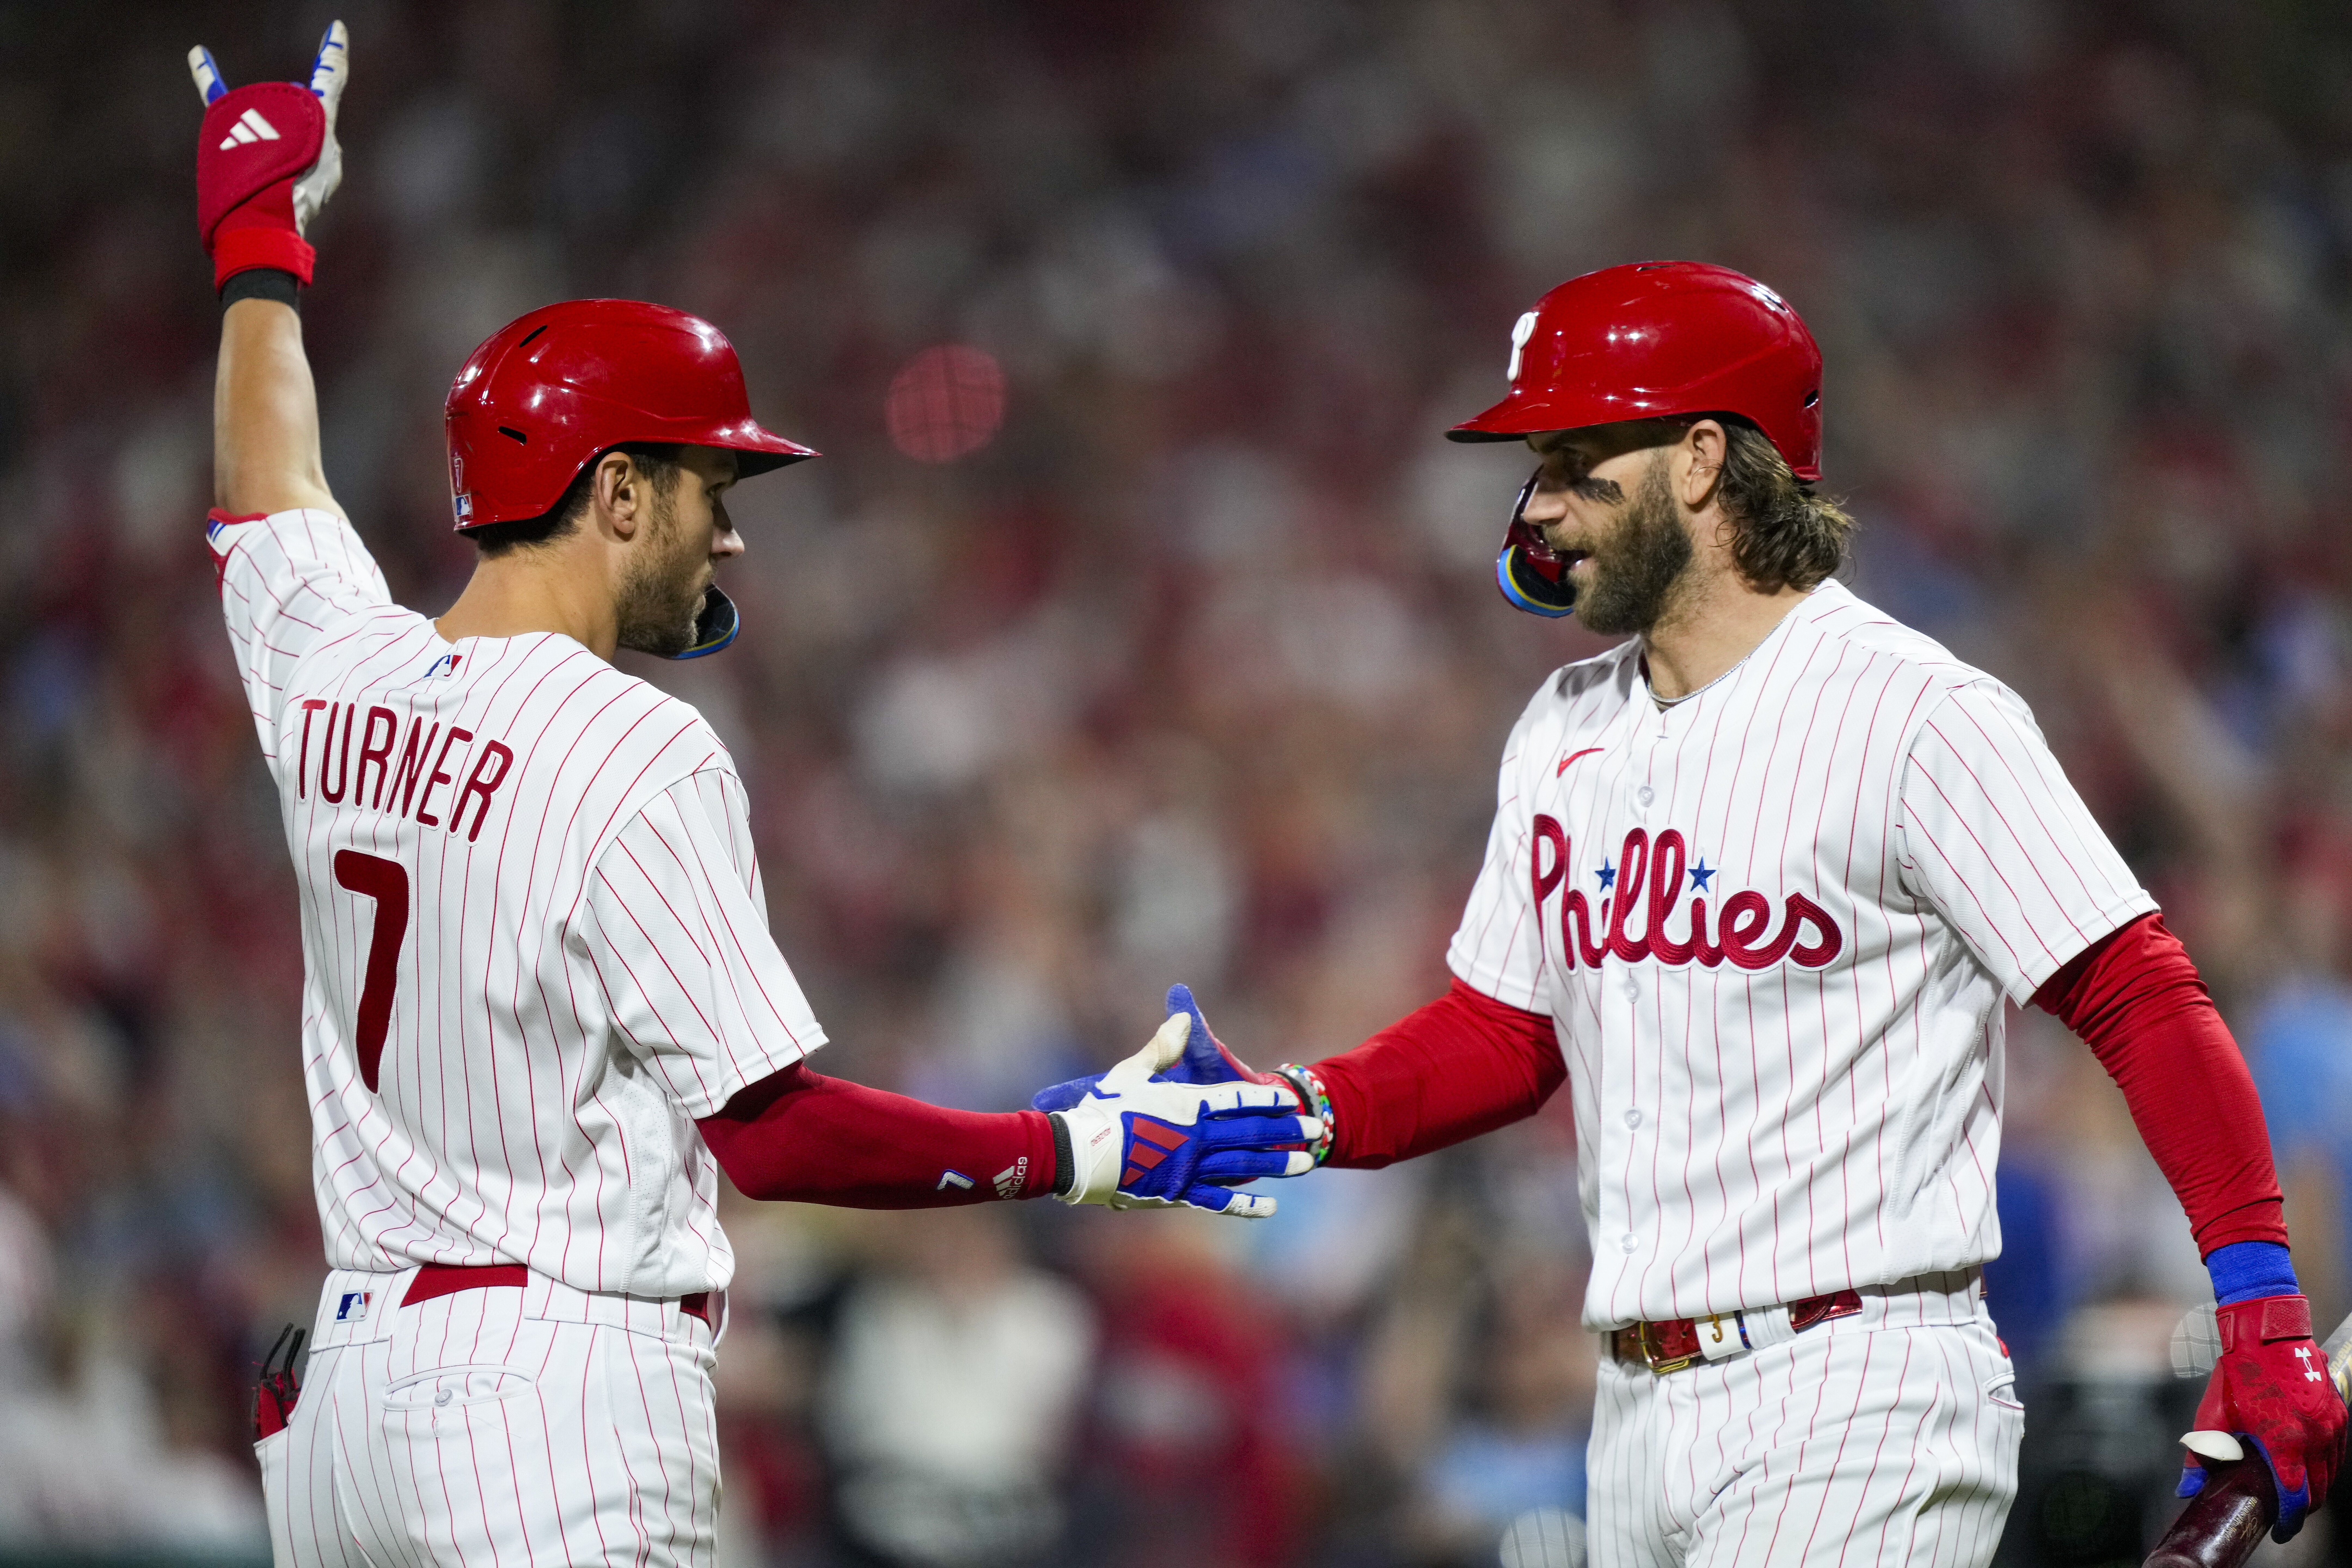 Bryce Harper's Baby Needs a Name, So Philly Fans Gave Some